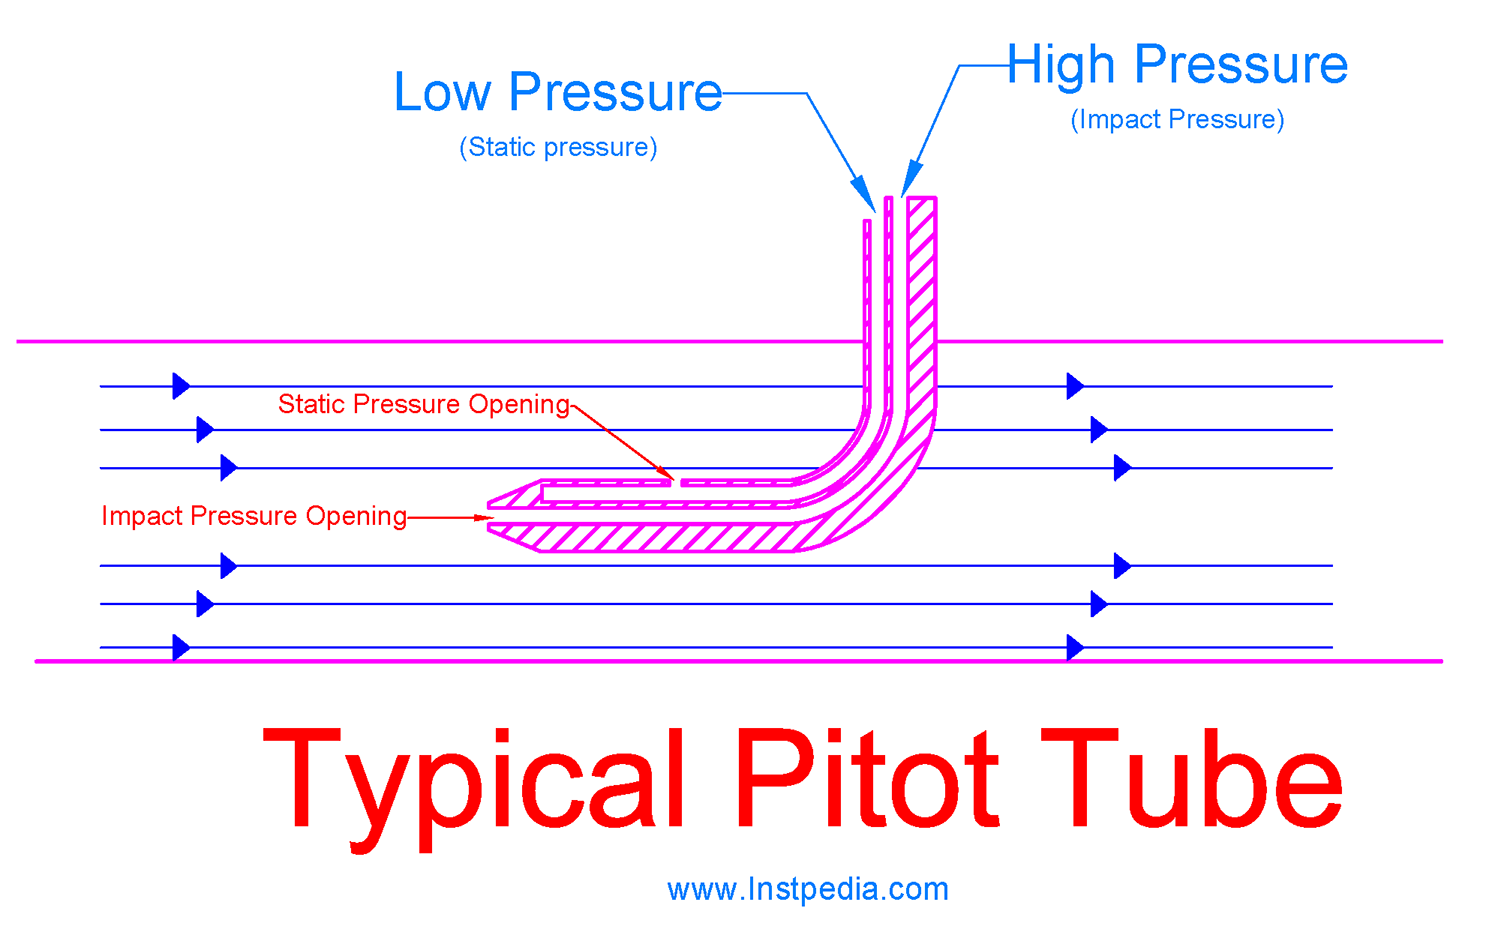 Typical Pitot Tube